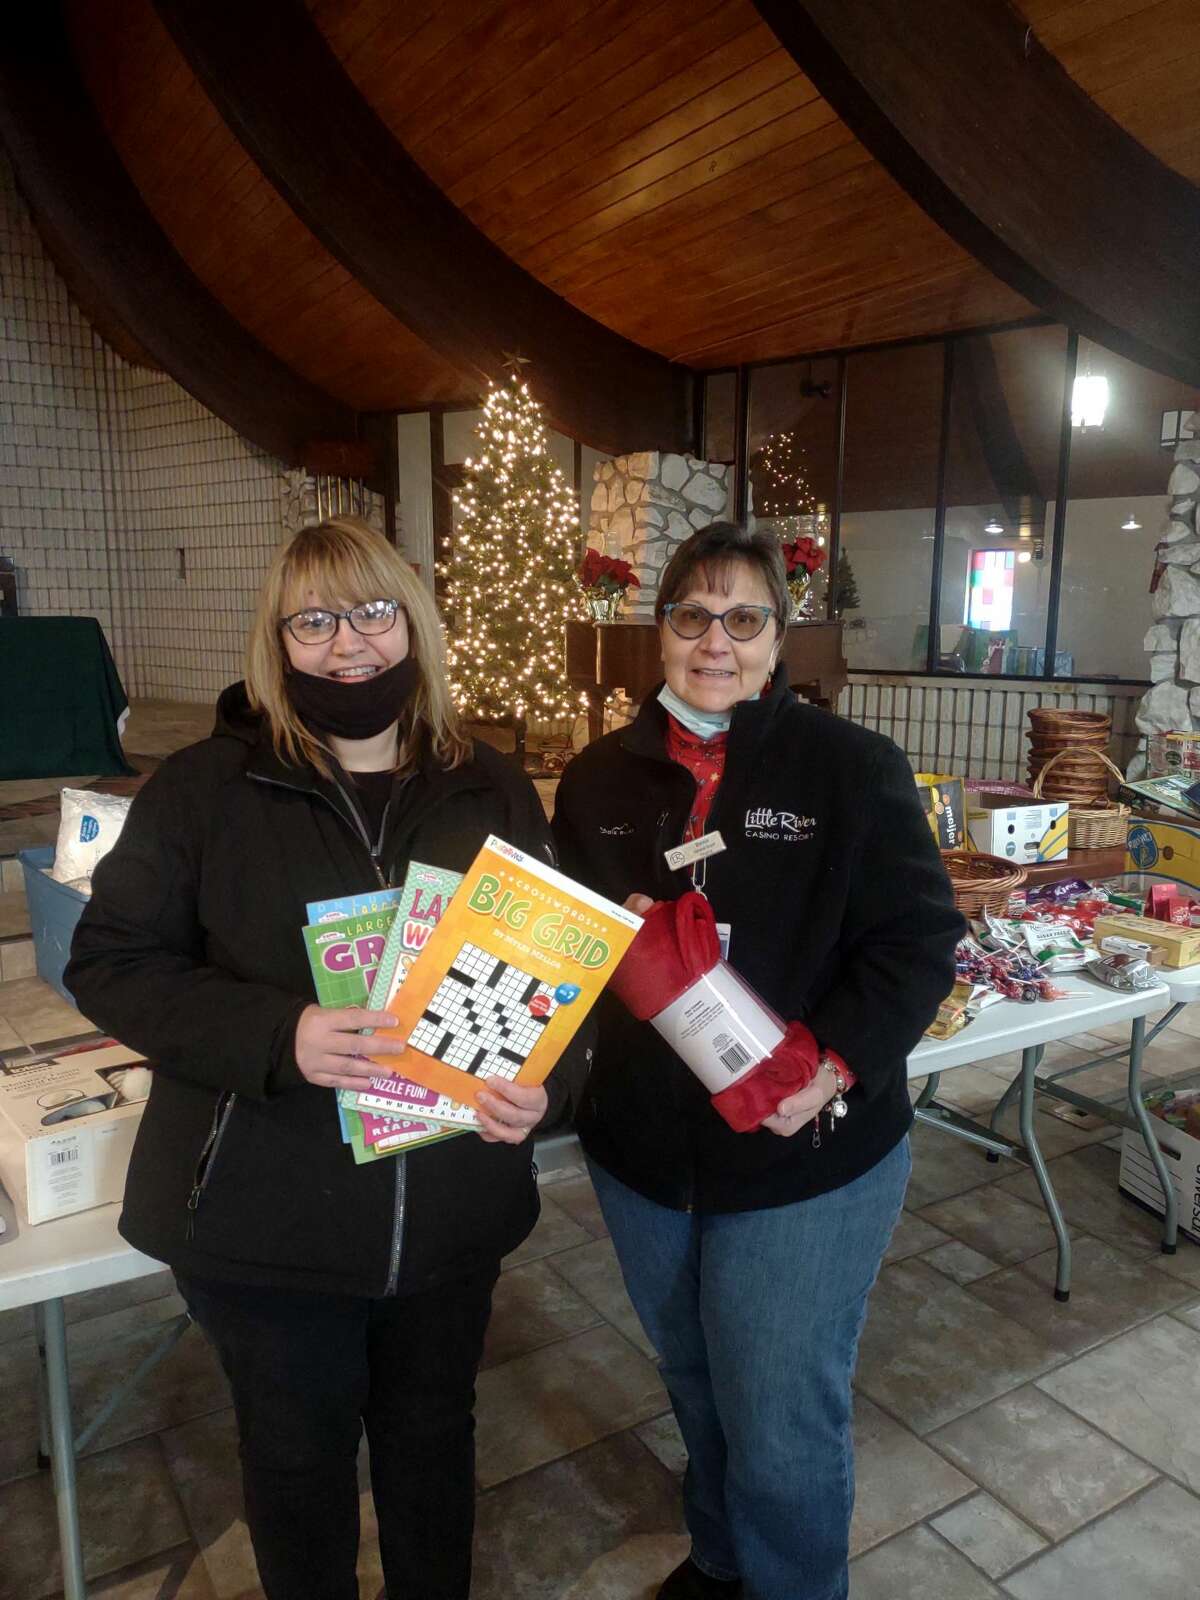 Members of the purchasing & warehouse teams at Little River Casino Resort worked together to purchase gifts for the senior center's Christmas Gifts for Homebound Seniors program.